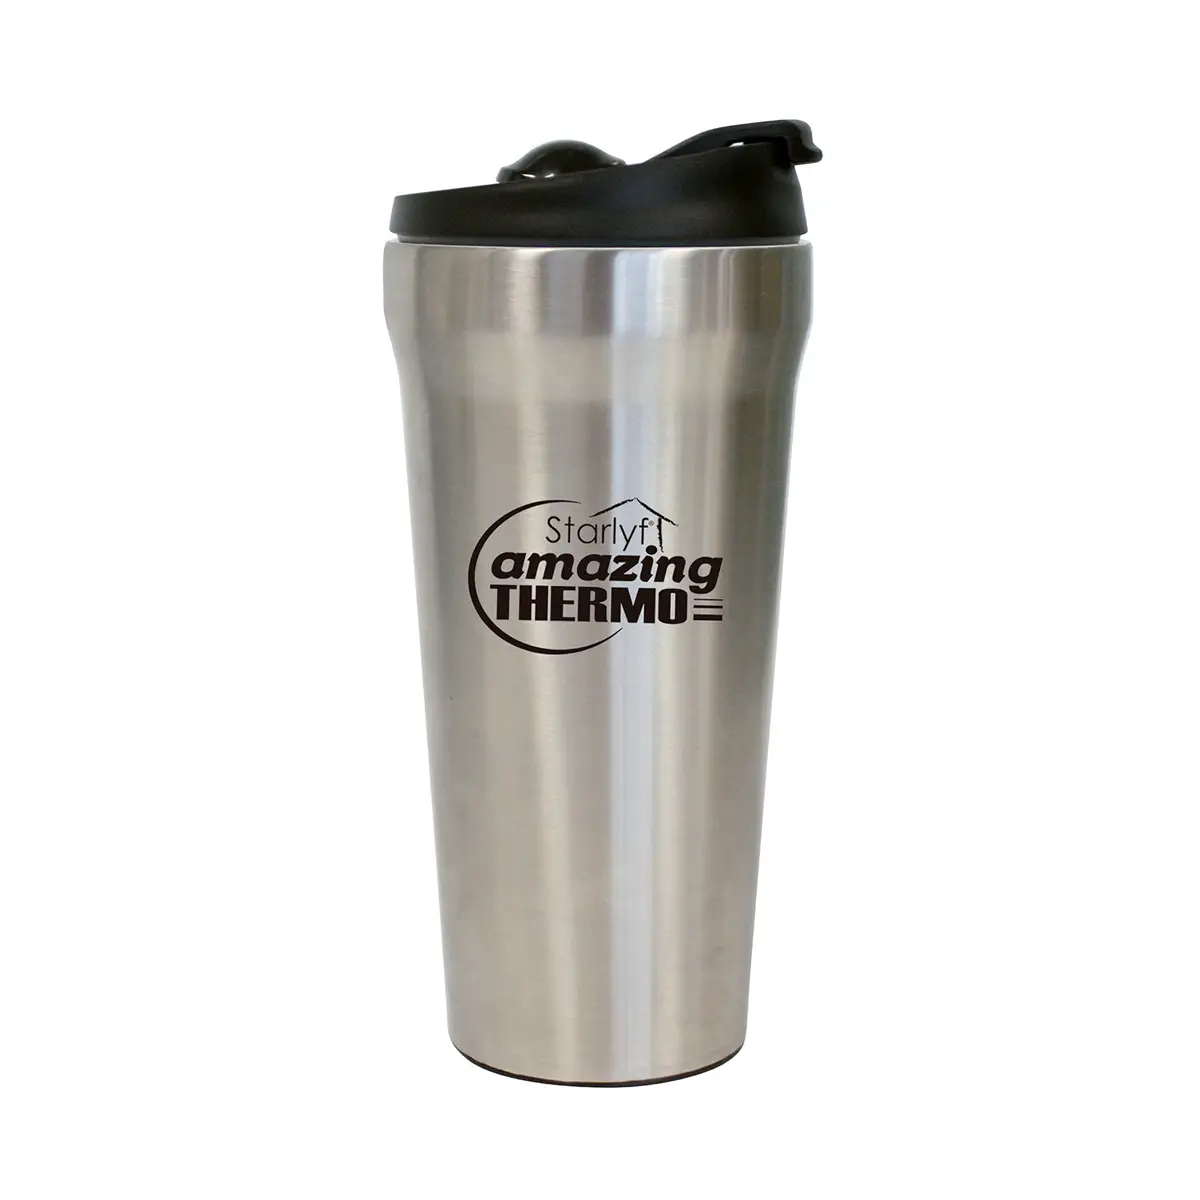 Amazing Thermo - Thermobecher 500 ml